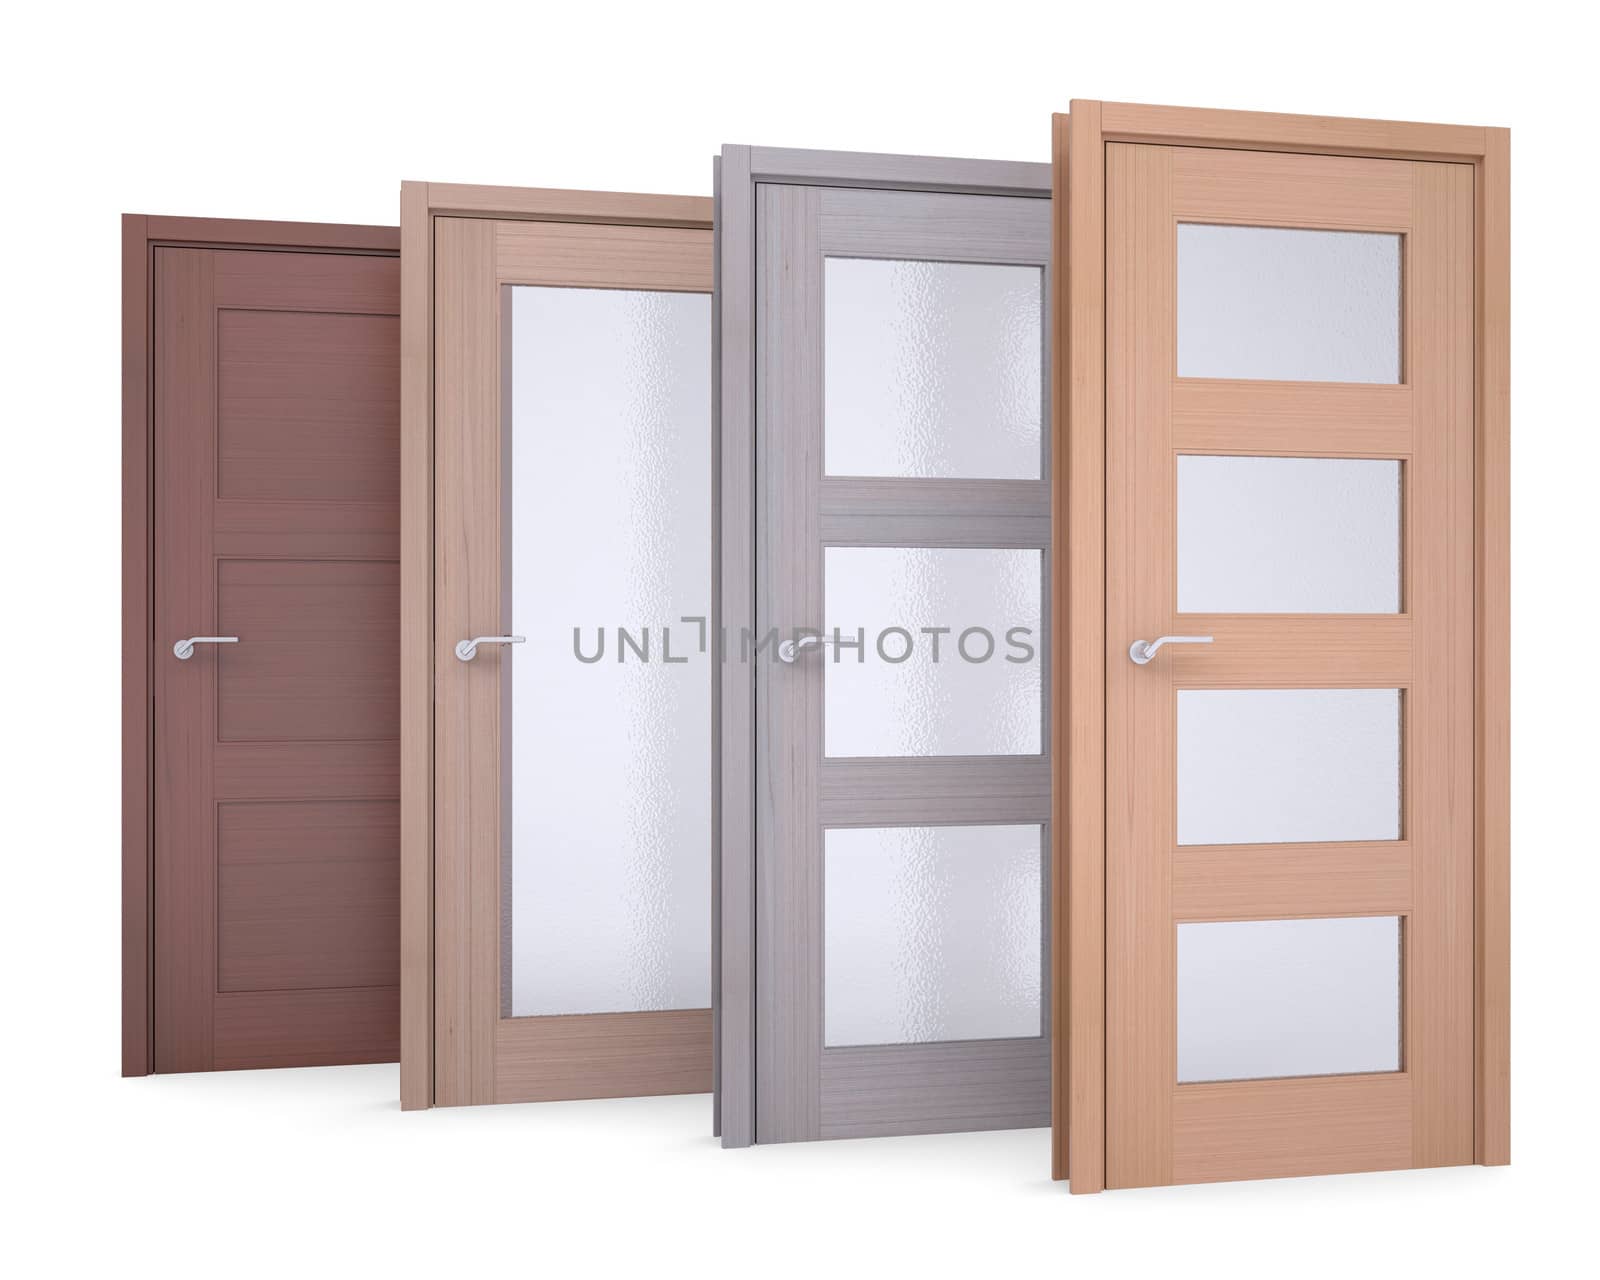 Group of wooden doors. Isolated render on a white background